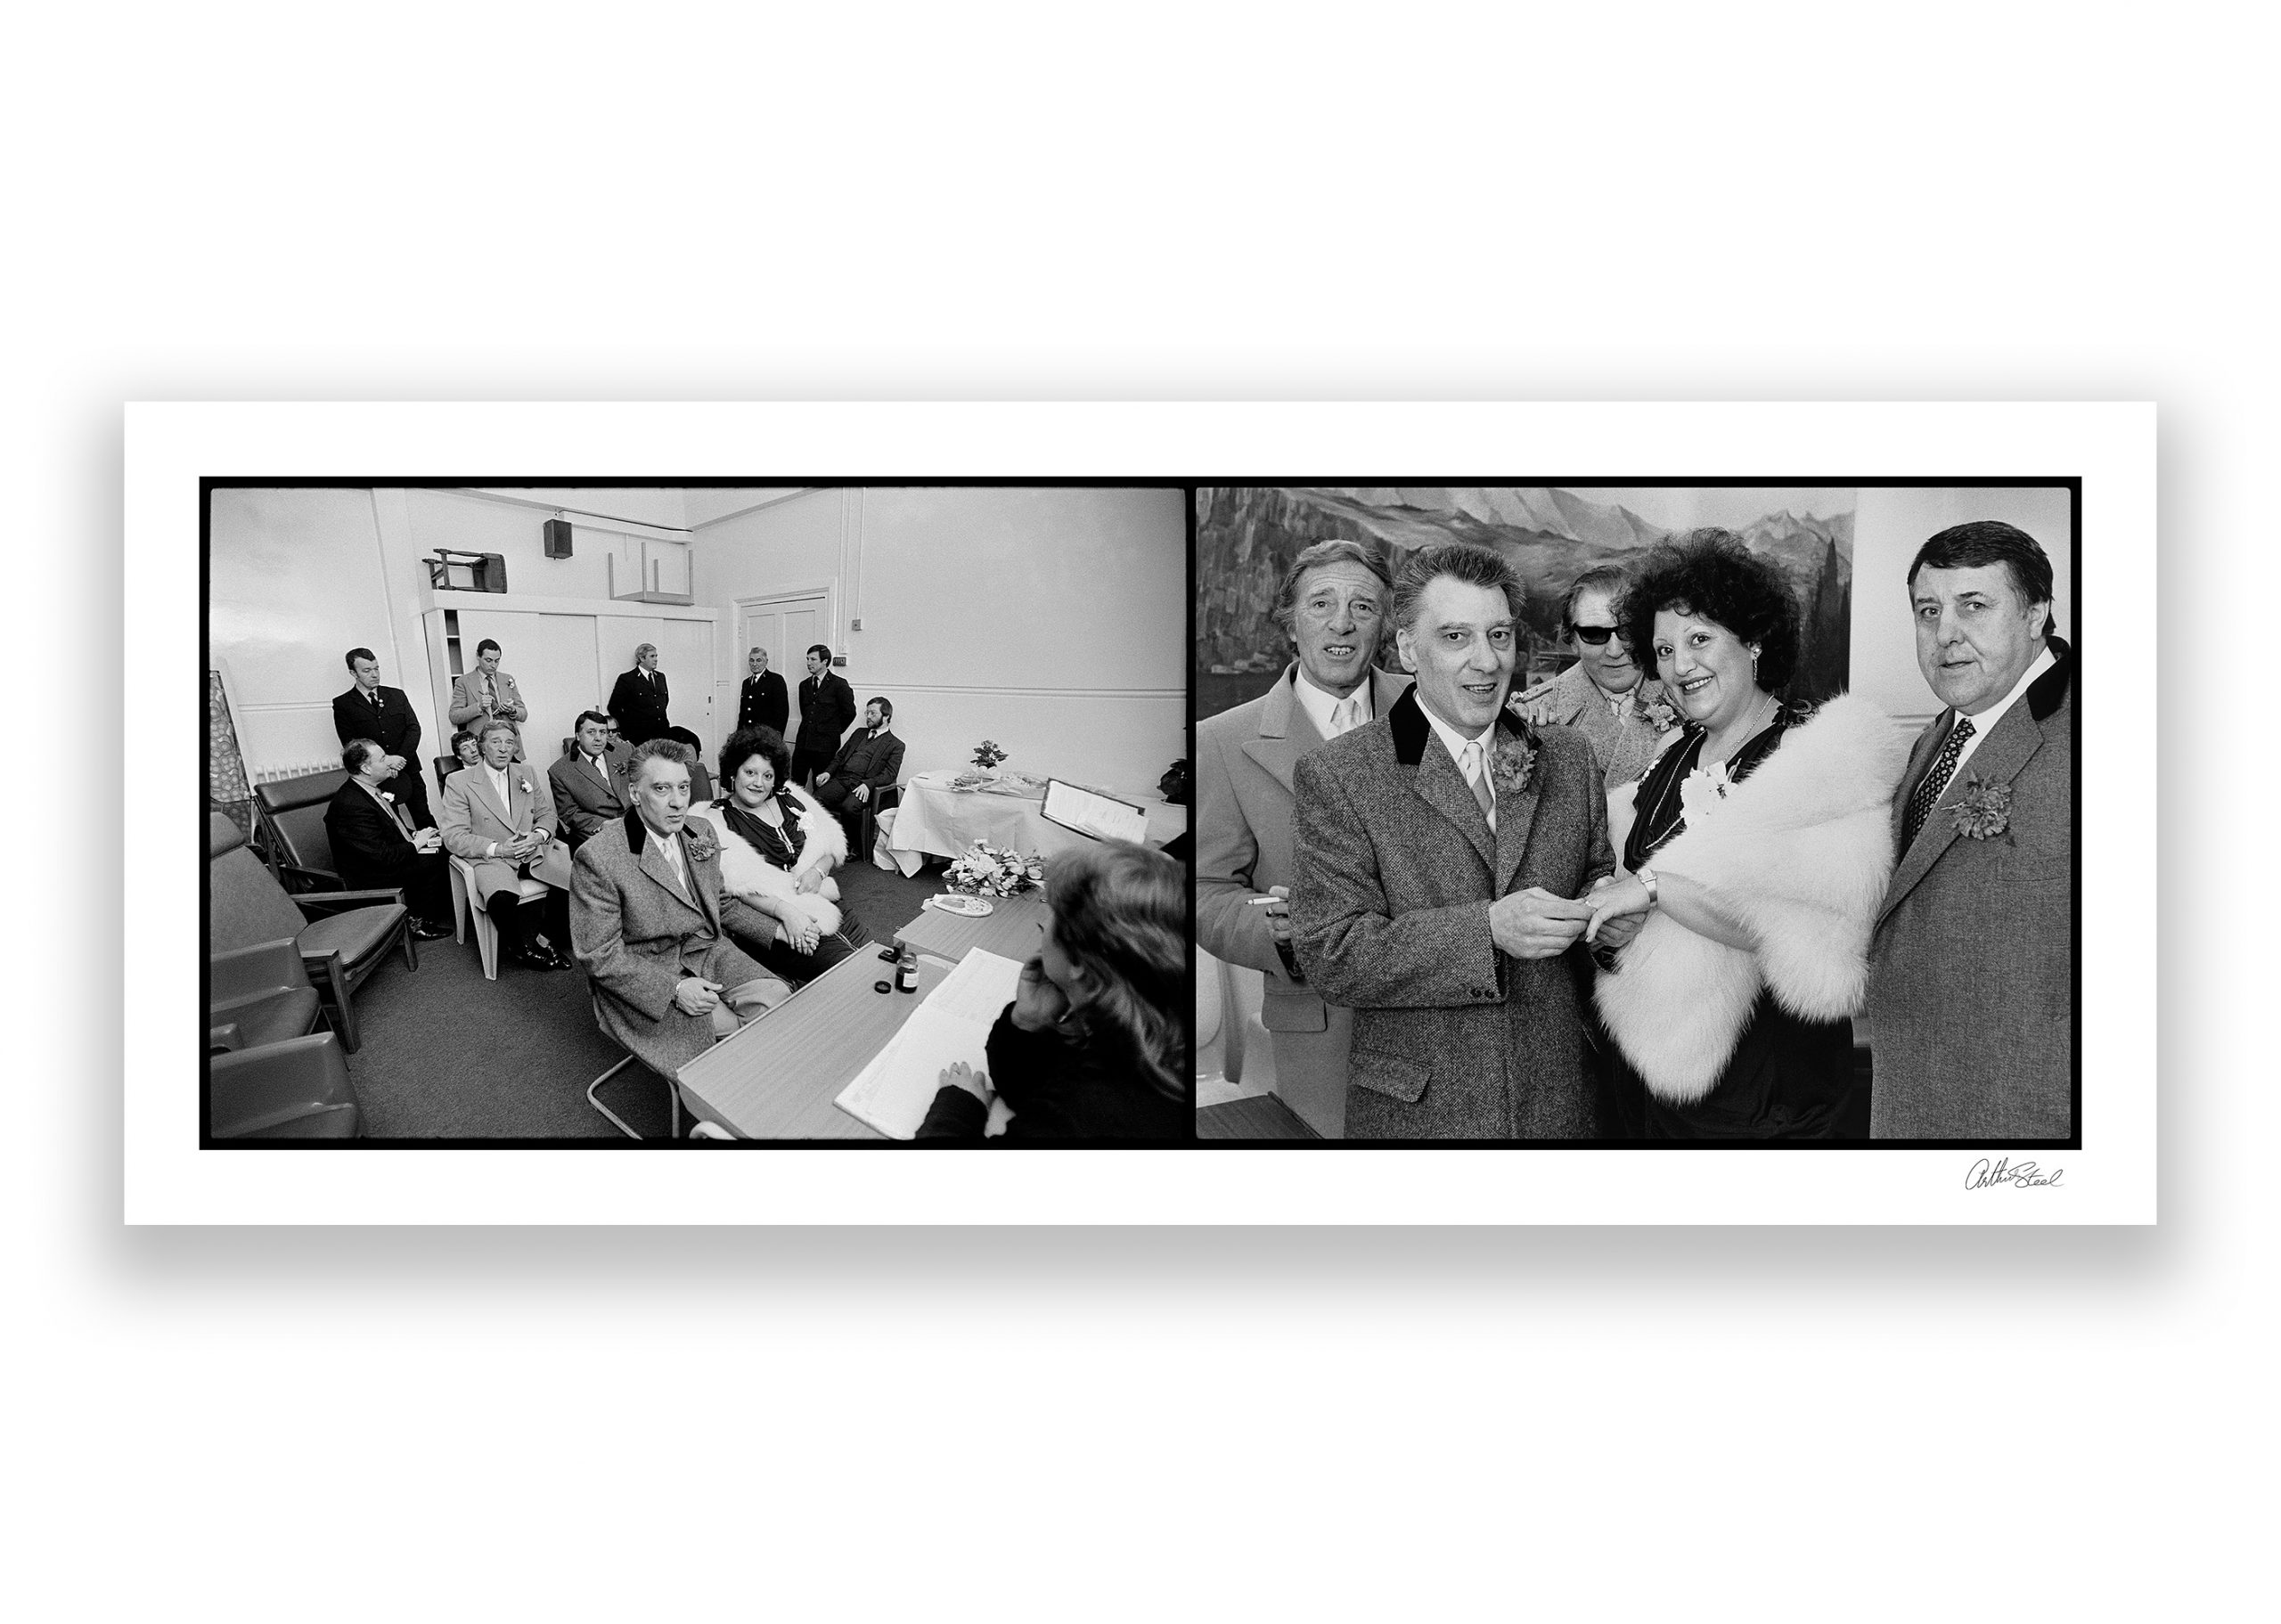 an exclusive diptych photograph of ronnie krays wedding in broadmoor hospital by photojournalist arthur steel